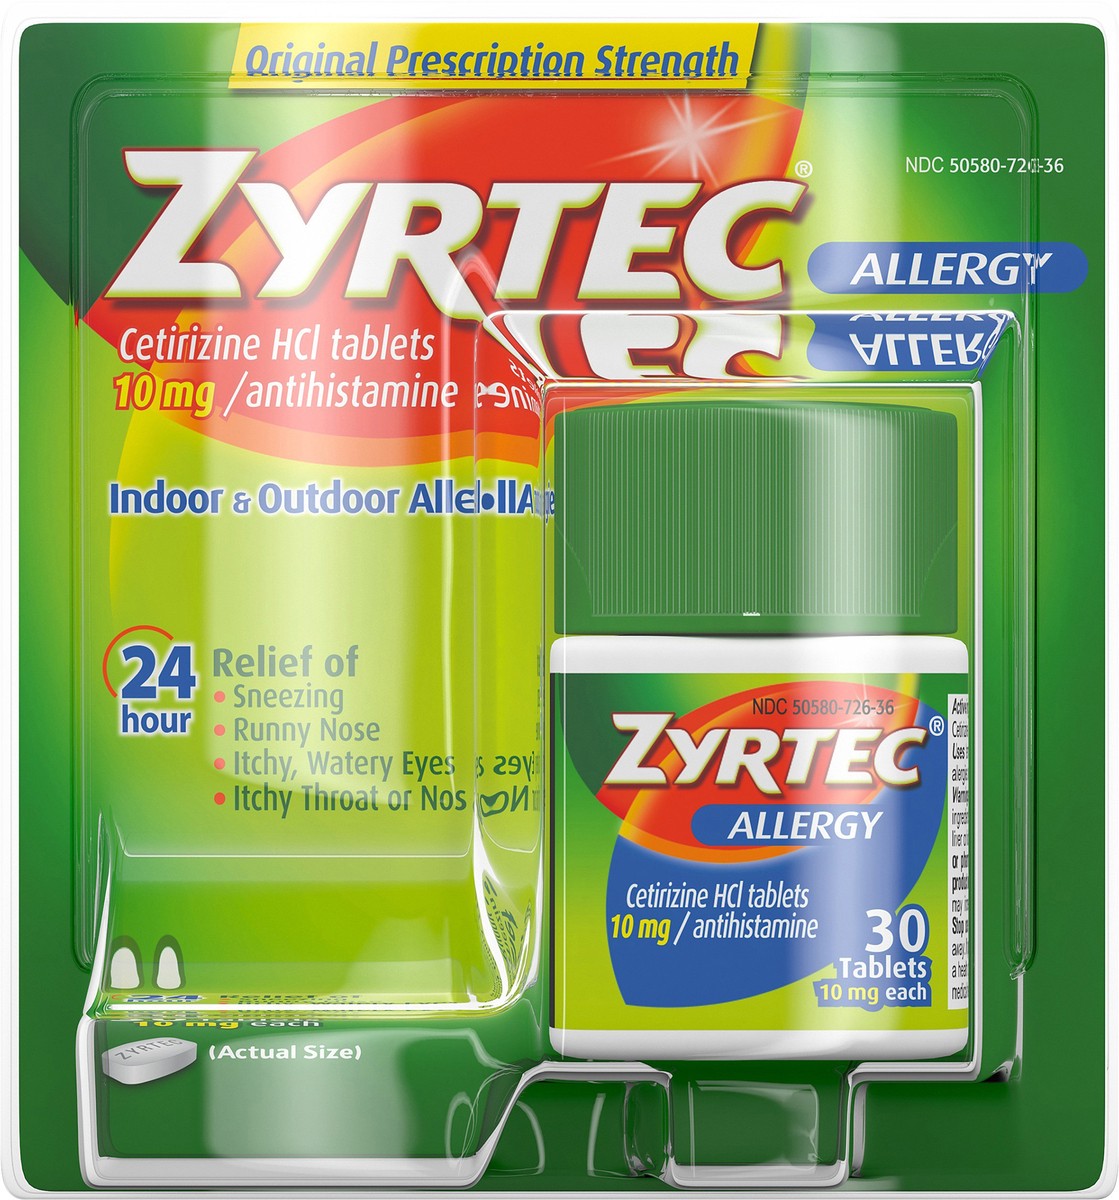 slide 6 of 7, Zyrtec 24 Hour Allergy Relief Tablets, Indoor & Outdoor Allergy Medicine with 10 mg Cetirizine HCl per Antihistamine Tablet, Relief from Runny Nose, Sneezing, Itchy Eyes & More, 30 ct, 30 ct